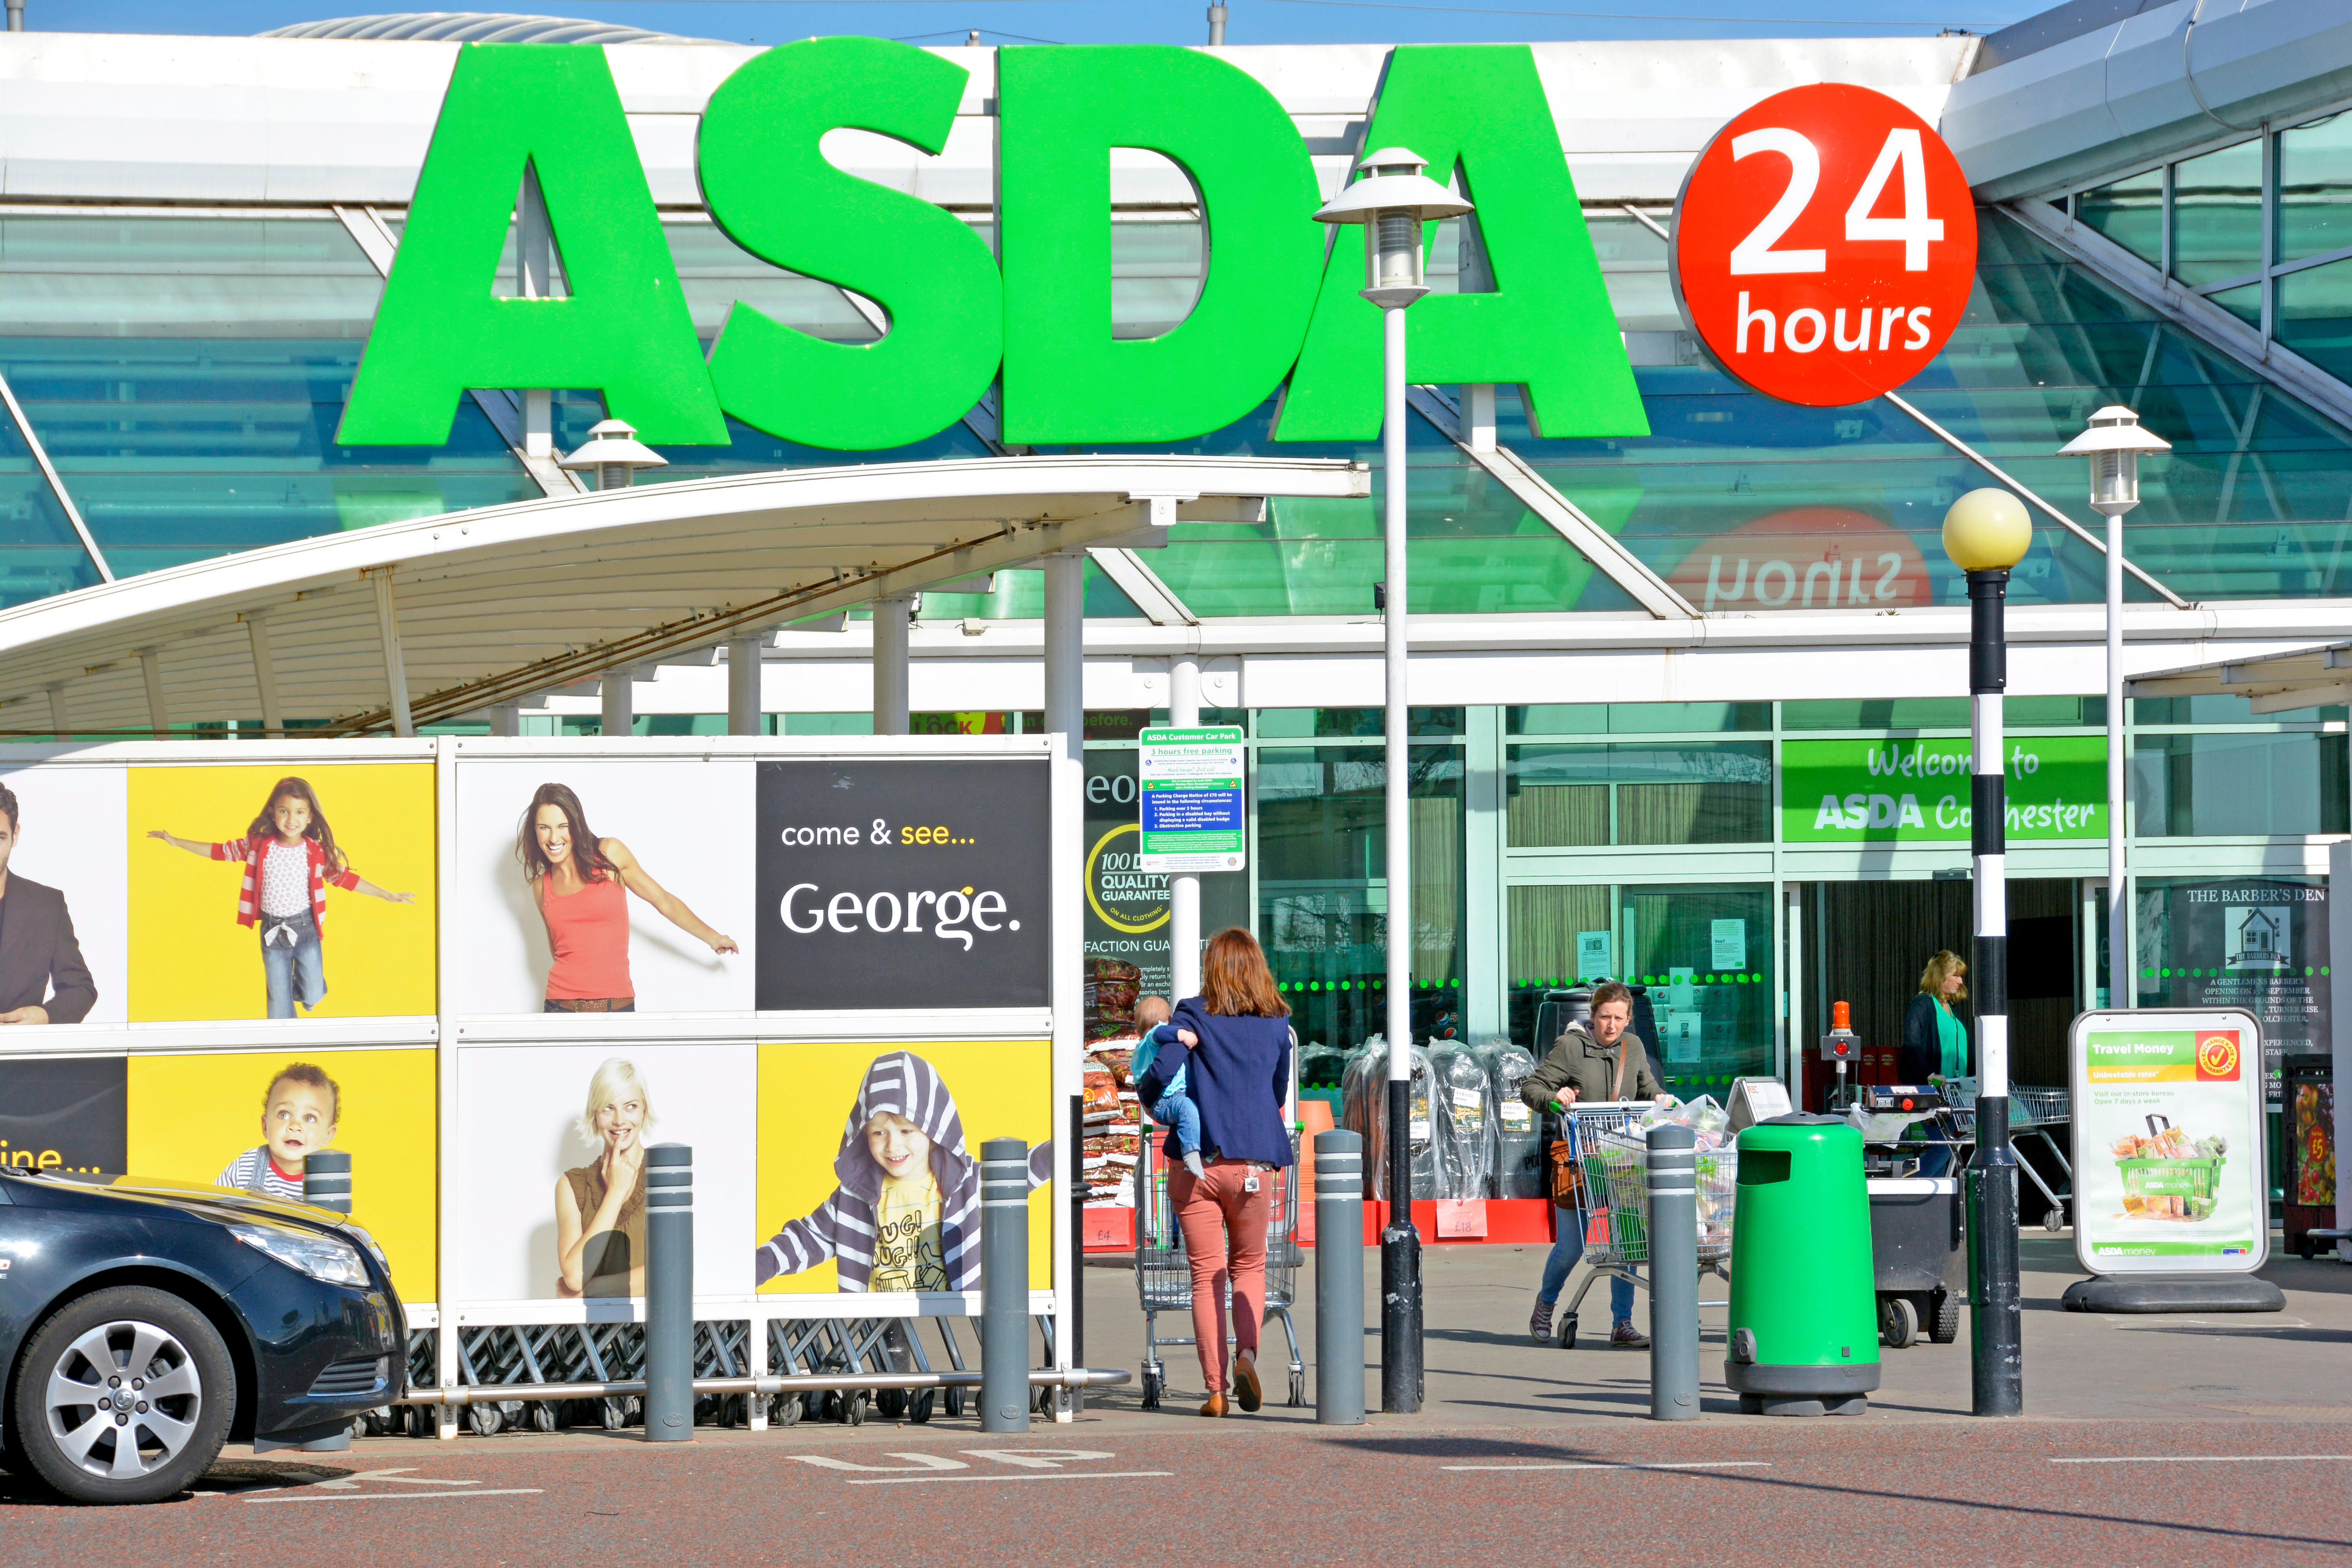 Asda has an app where customers can earn money off through repeat visits to the store